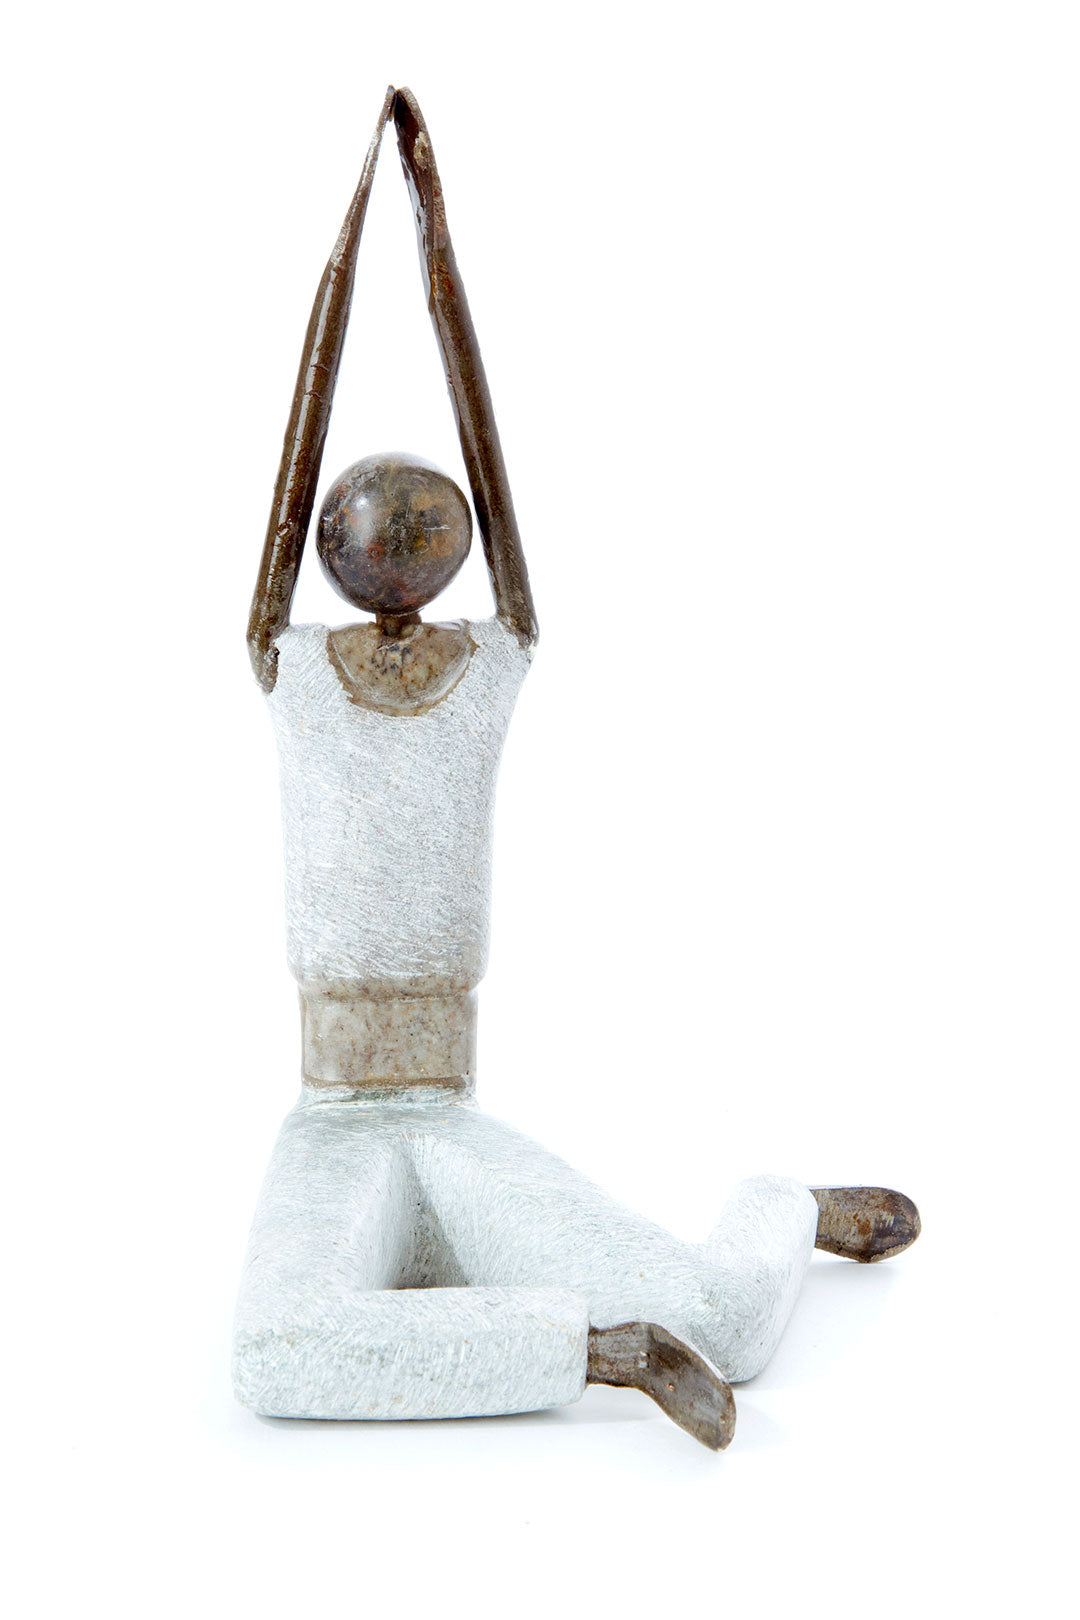 Stone & Metal Yogi Sculpture with Clasped Hands Default Title